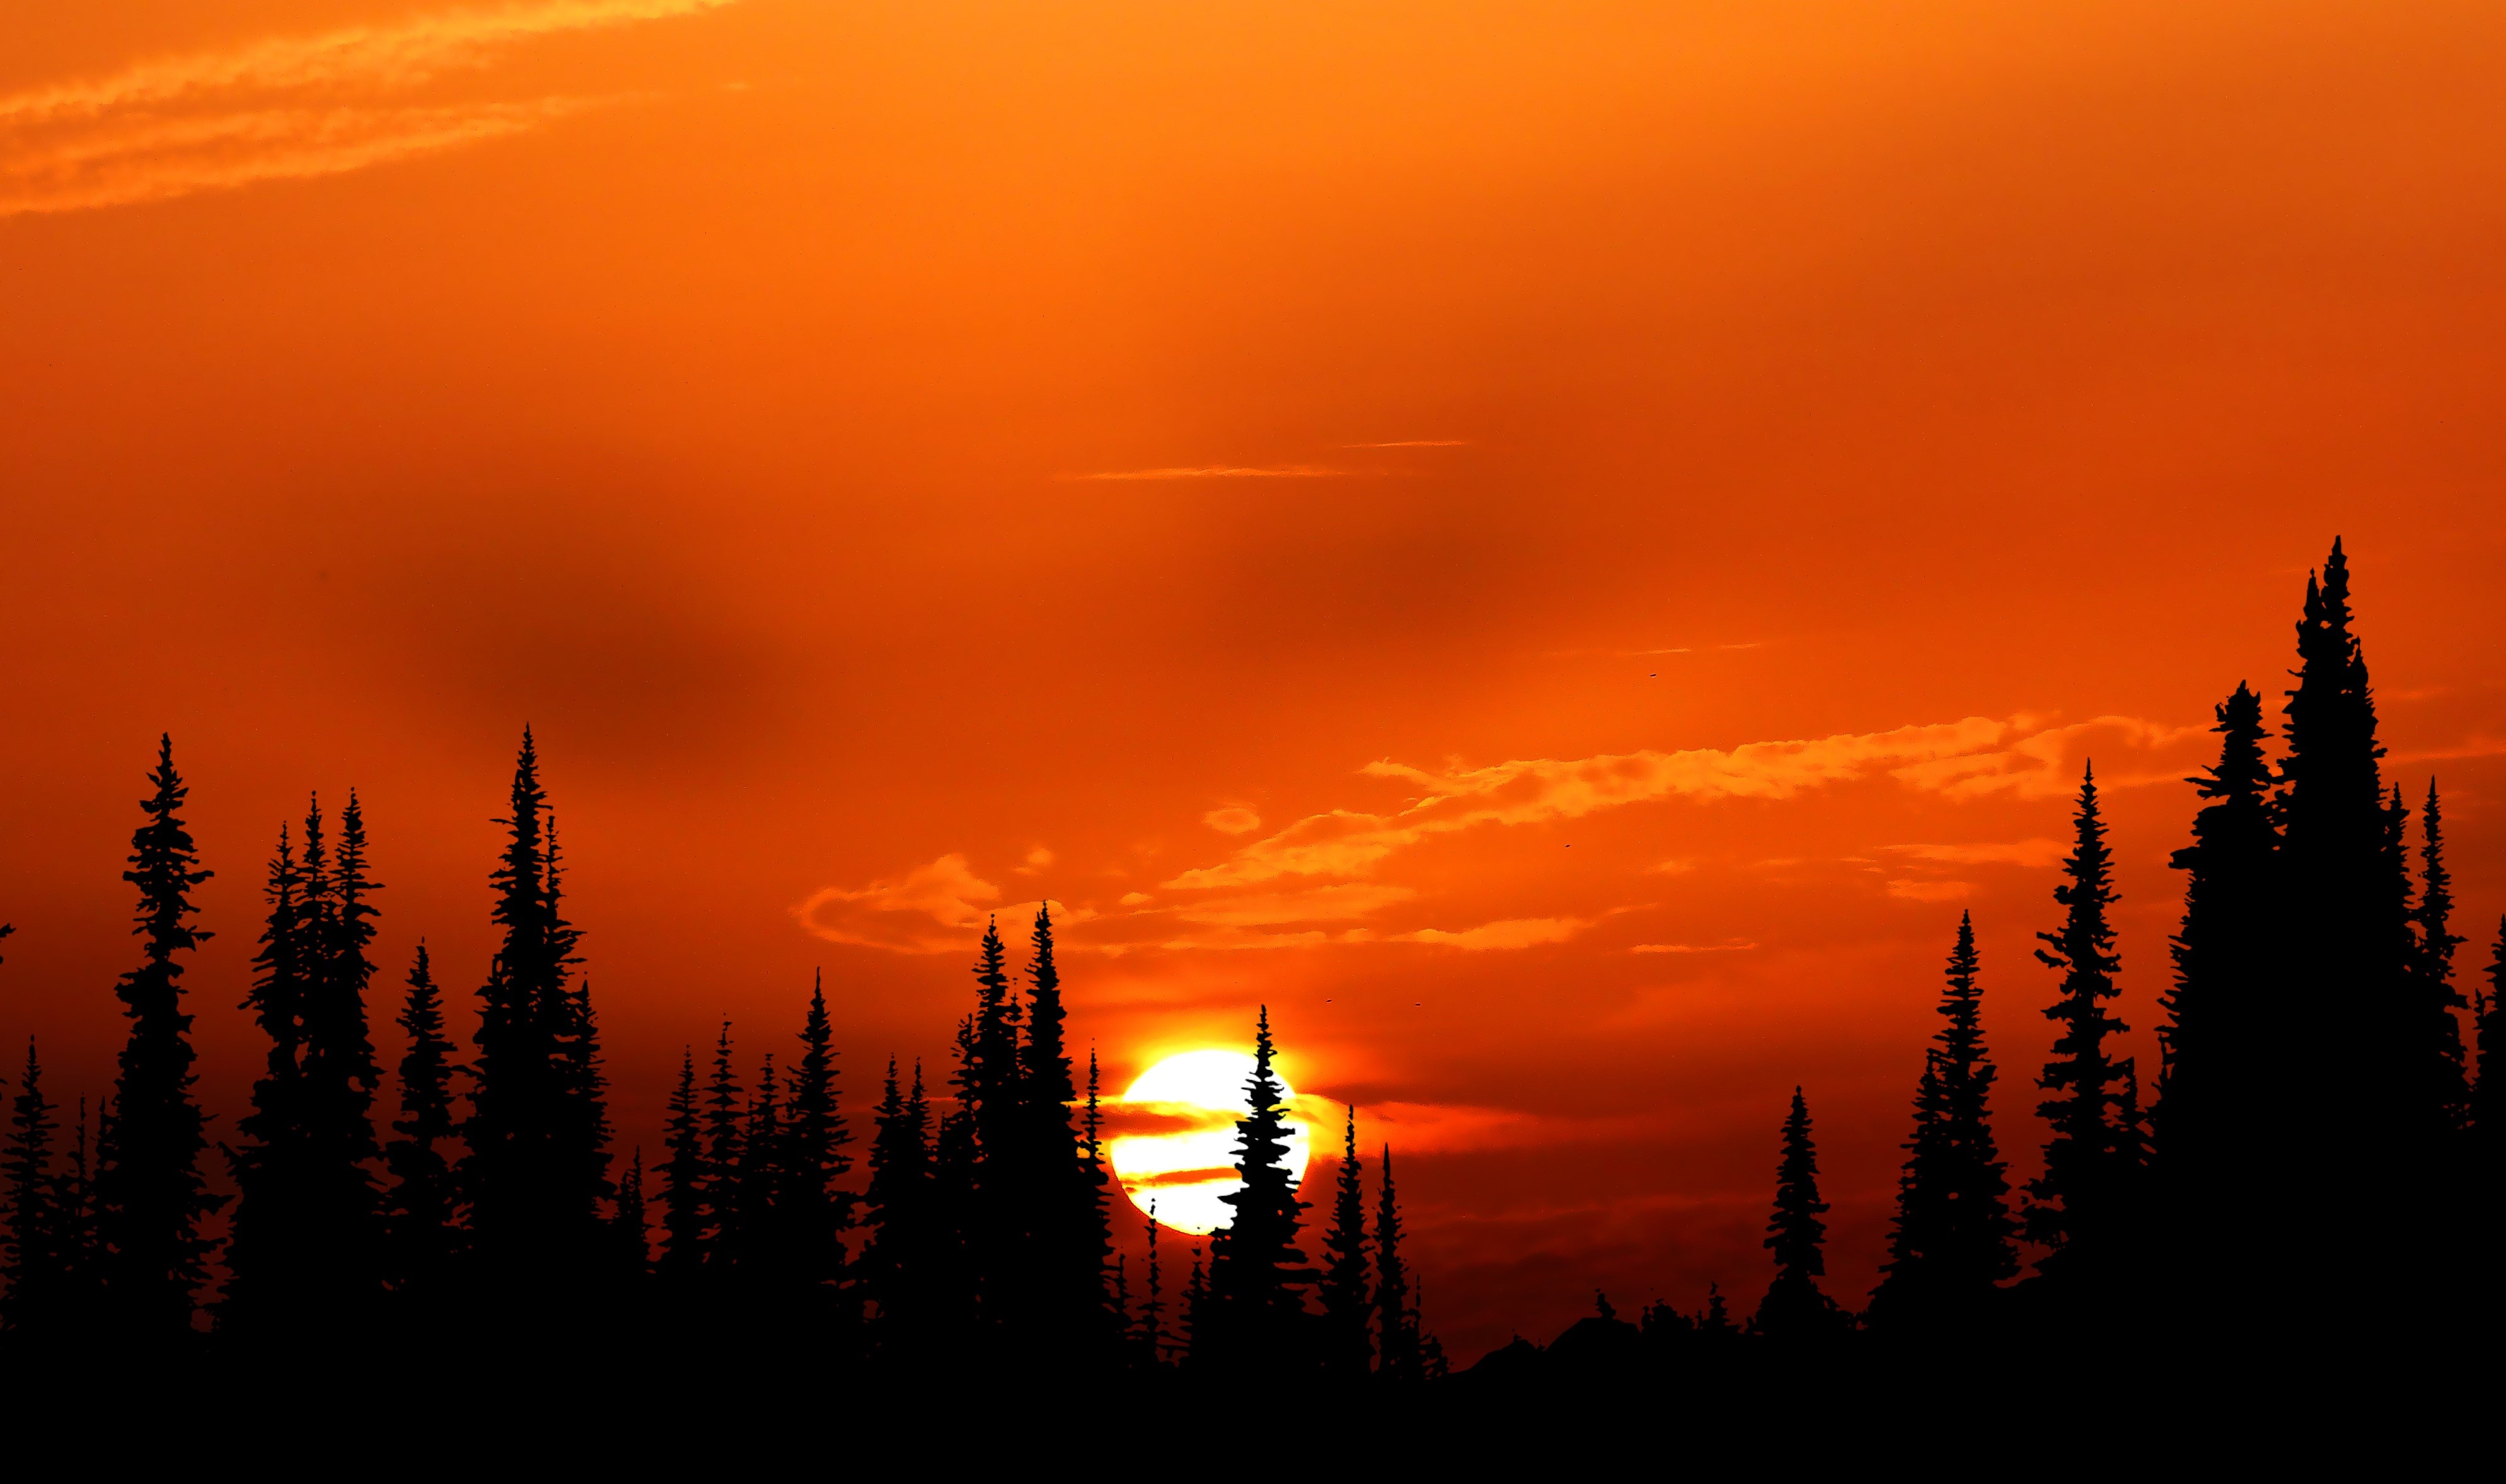 Relaxing Orange Sunset Evening 4k Hd Nature 4k Wallpapers Images